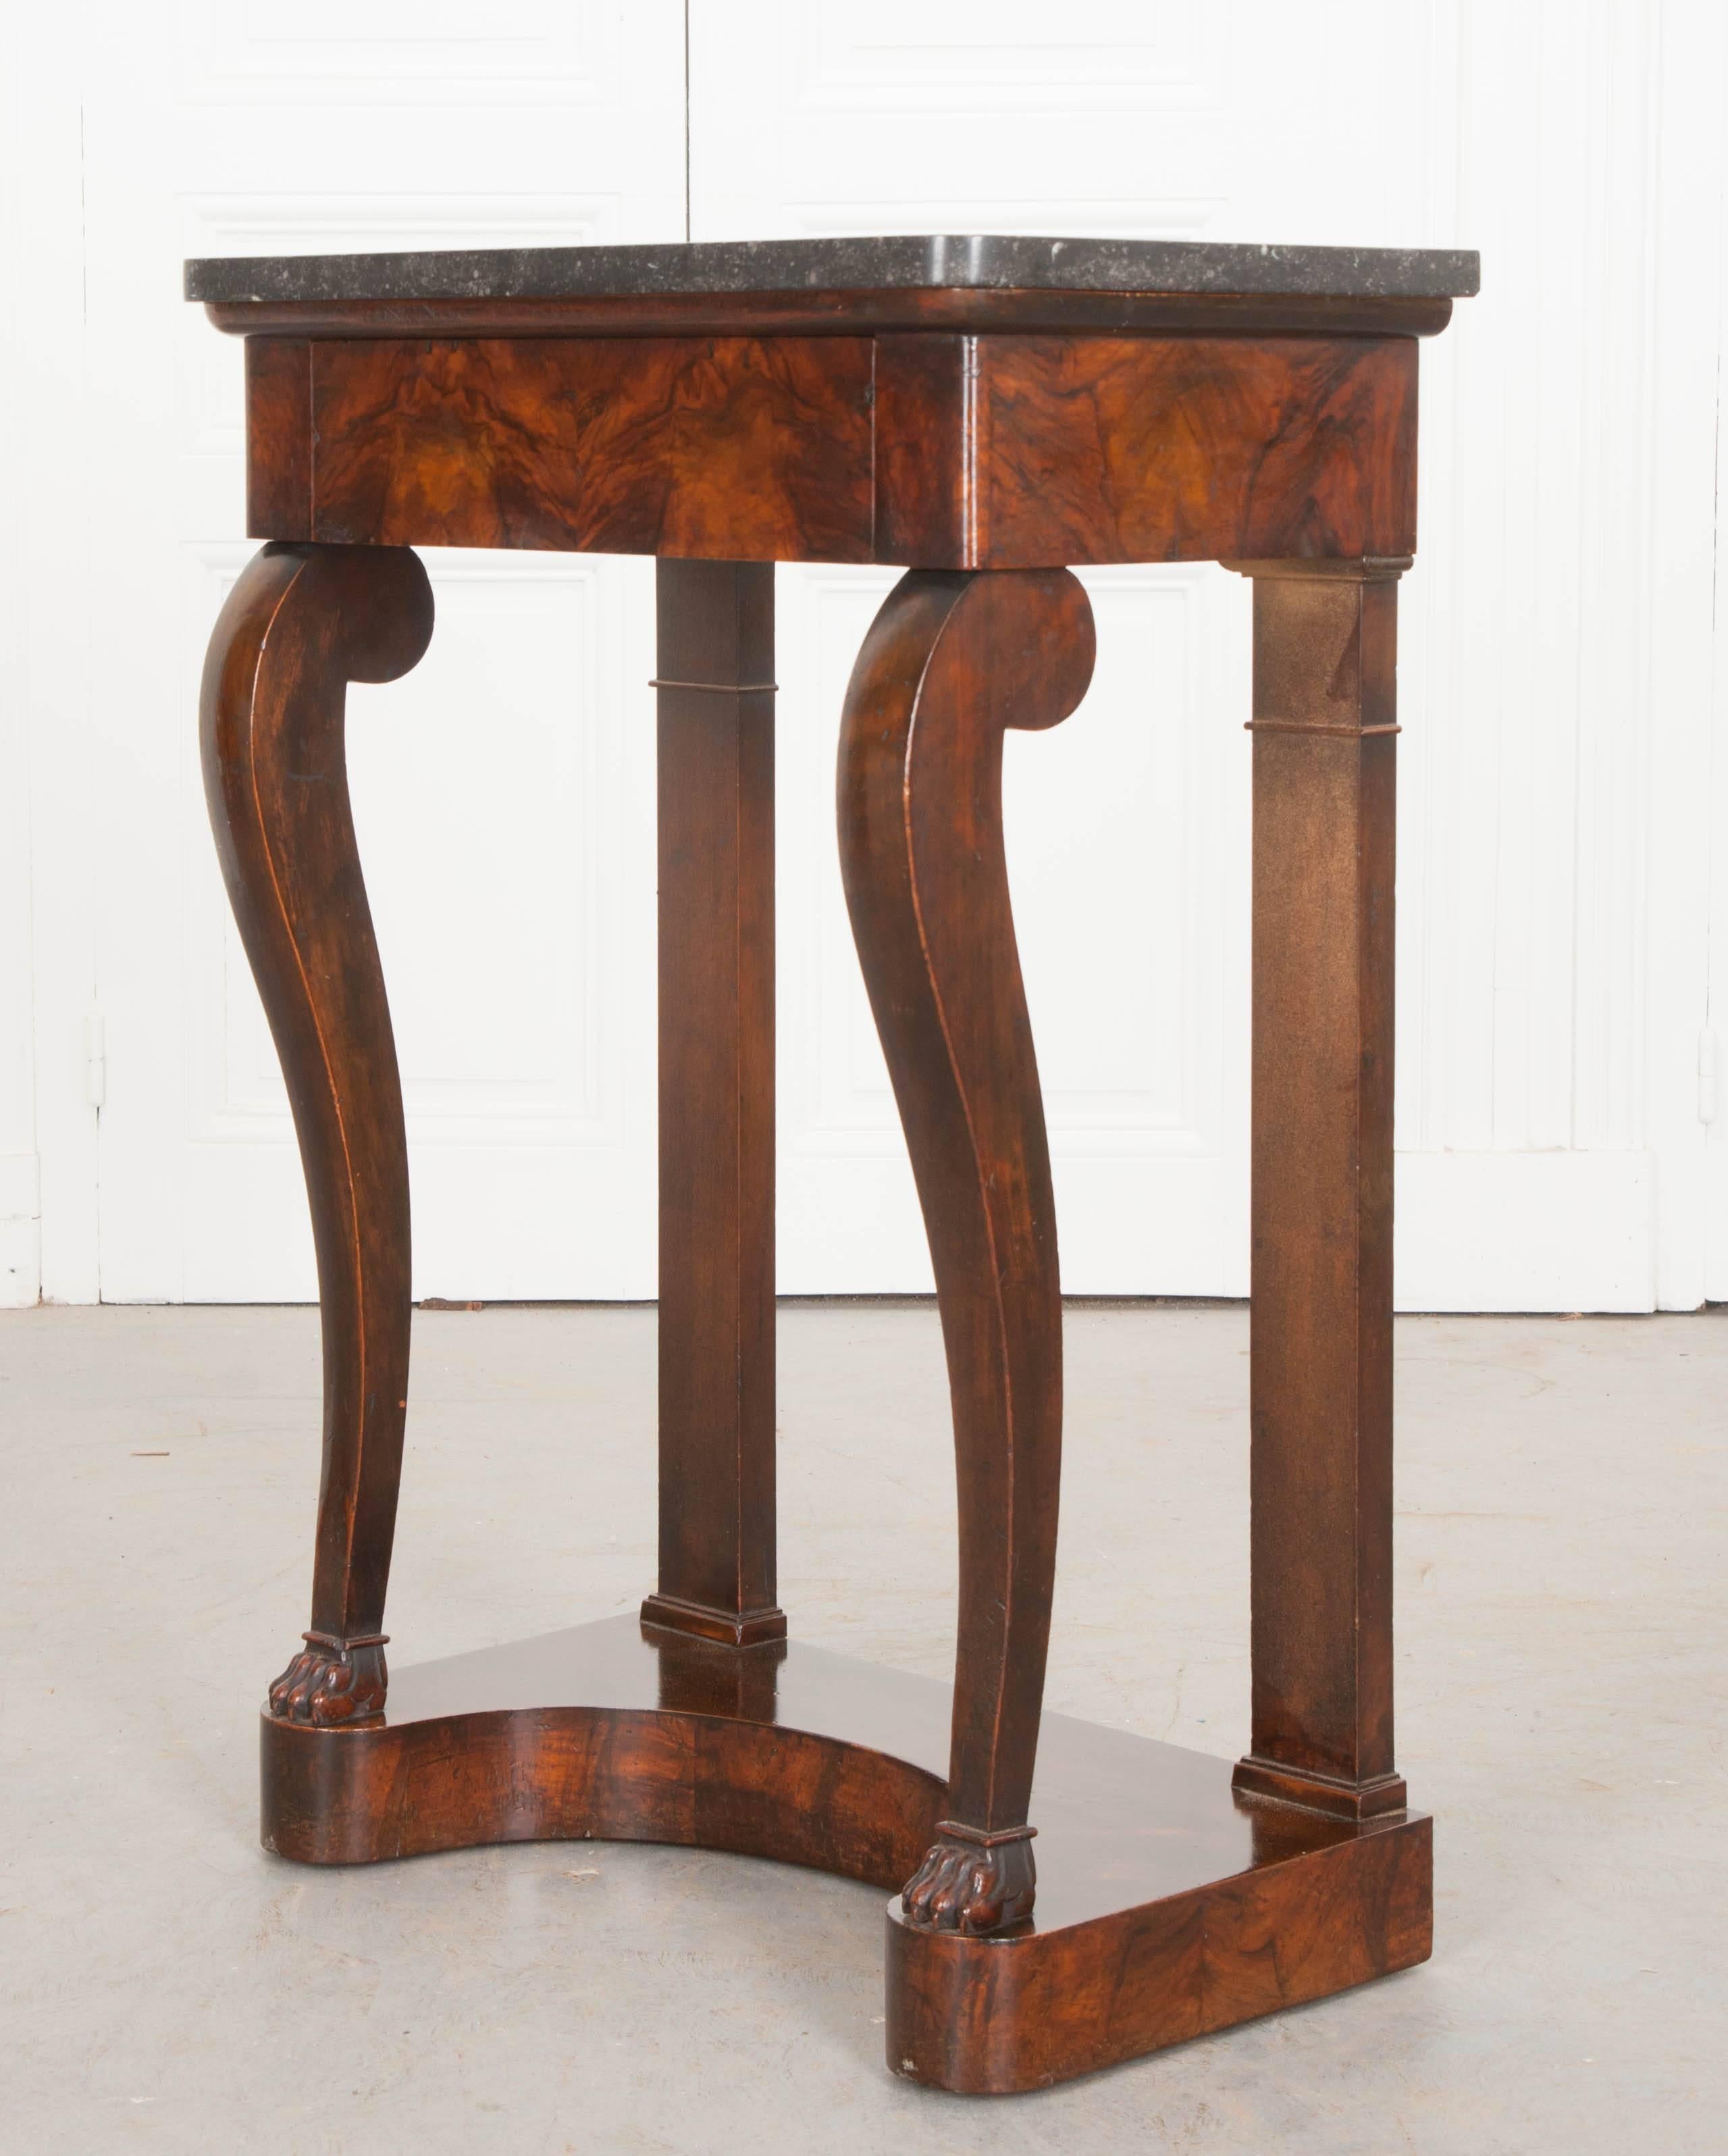 A stunning little marble-top console, Restauration period, France. The thick fossil-marble top is in wonderful antique condition, free from any noteworthy blemishes, and original to the console. The beautifully burled apron houses a drawer,